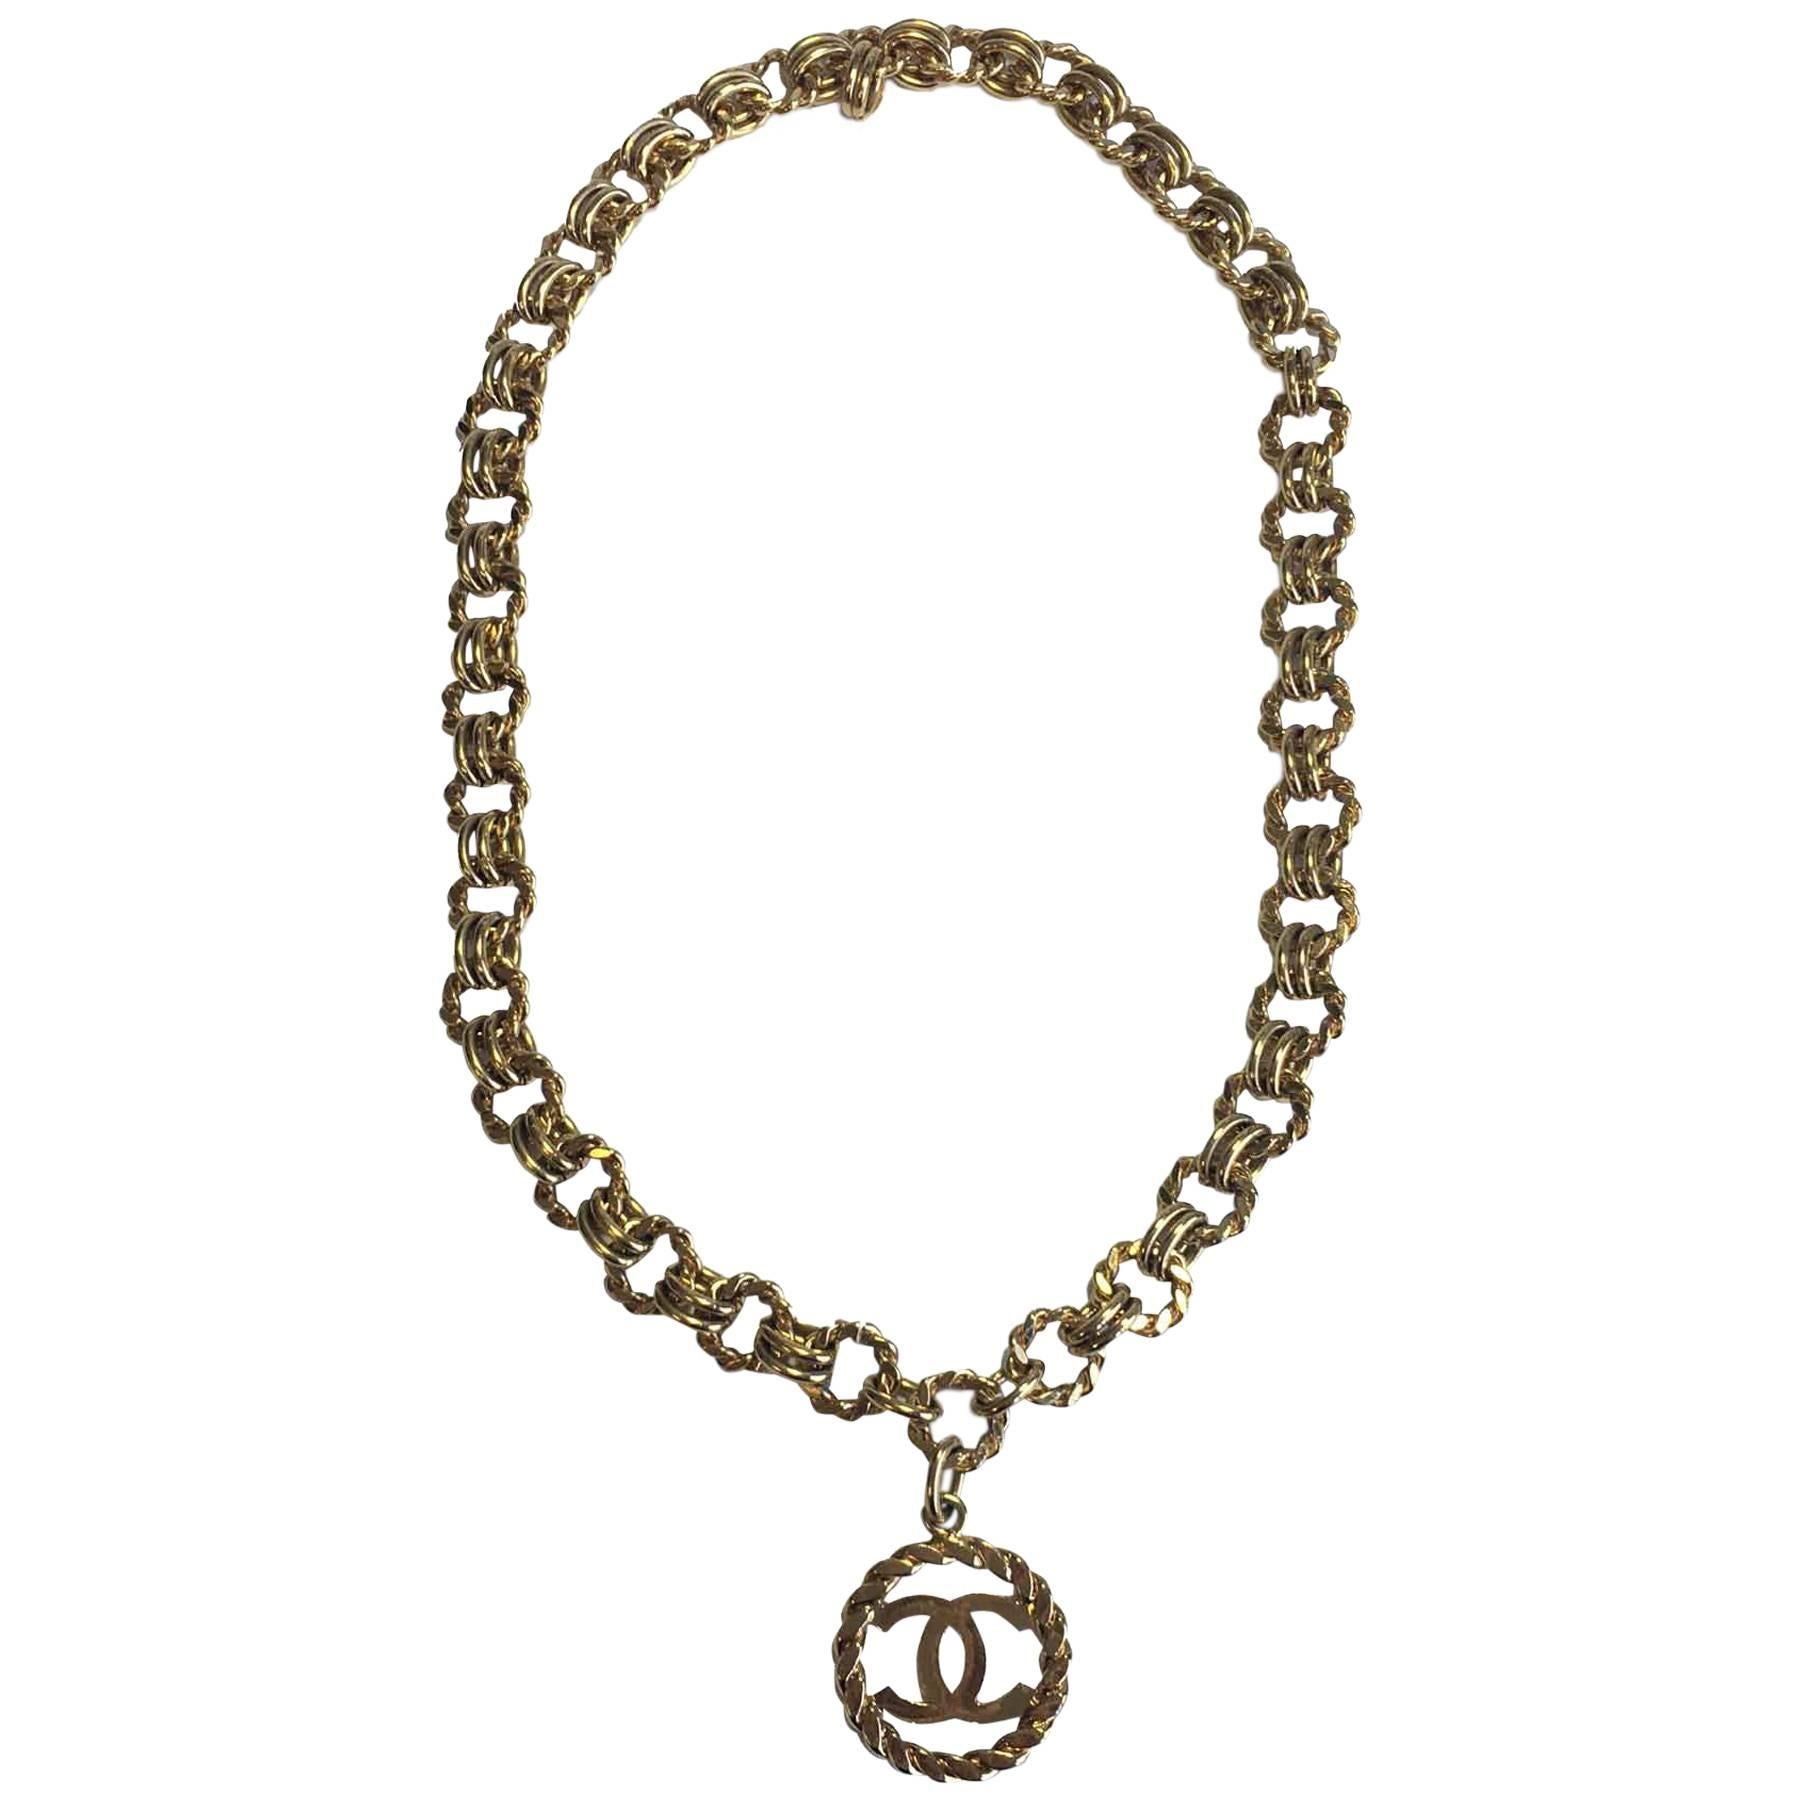 Vintage CHANEL Pendant Necklace in Gilded Metal